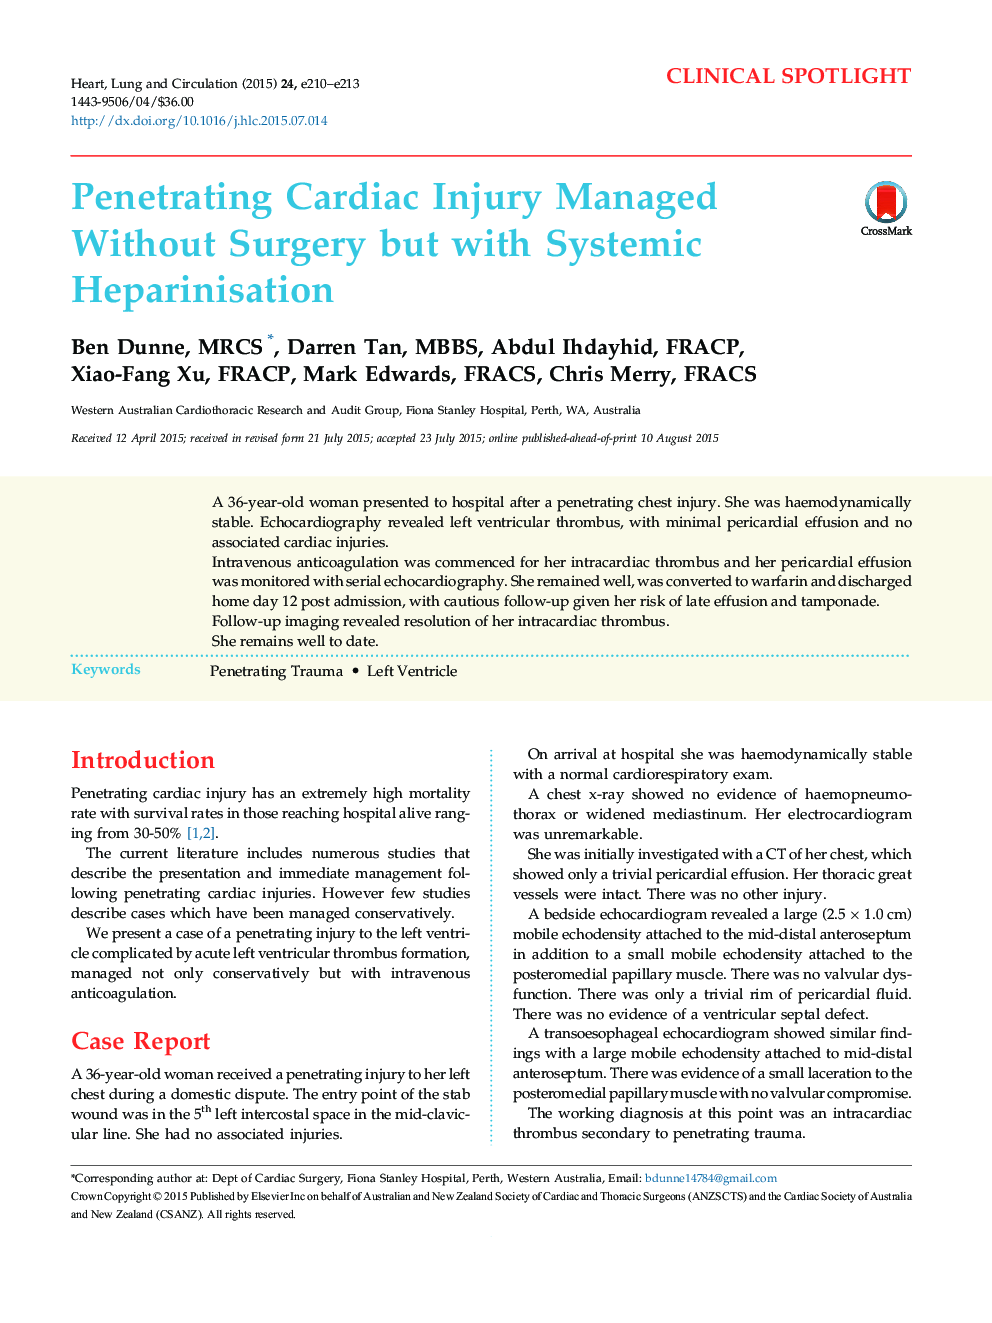 Penetrating Cardiac Injury Managed Without Surgery but with Systemic Heparinisation